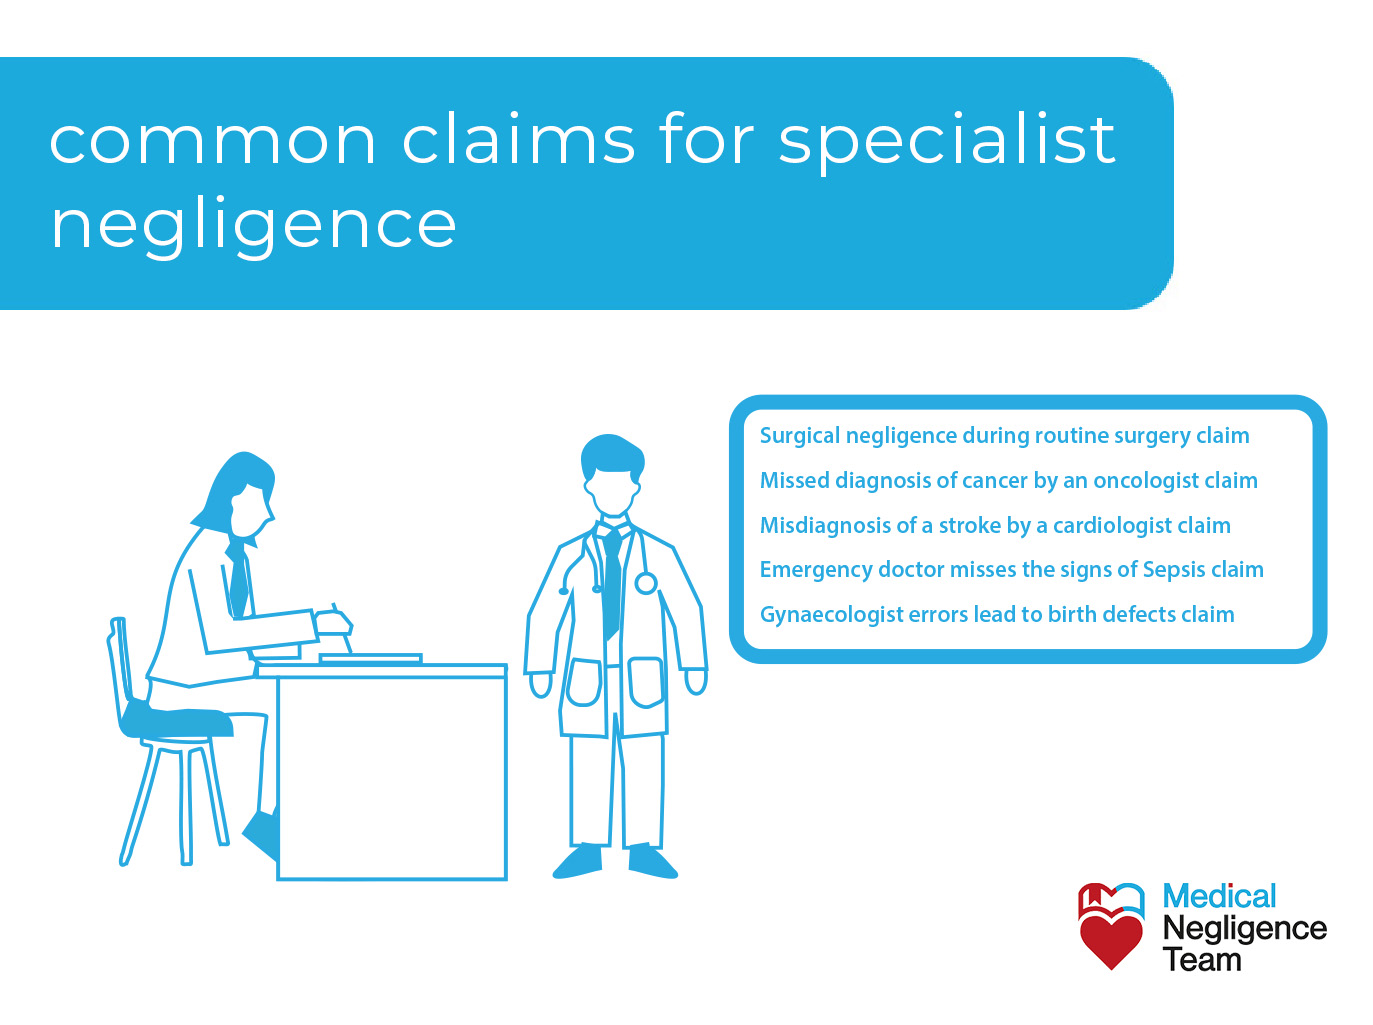 Common claims against a medical specialist for negligence